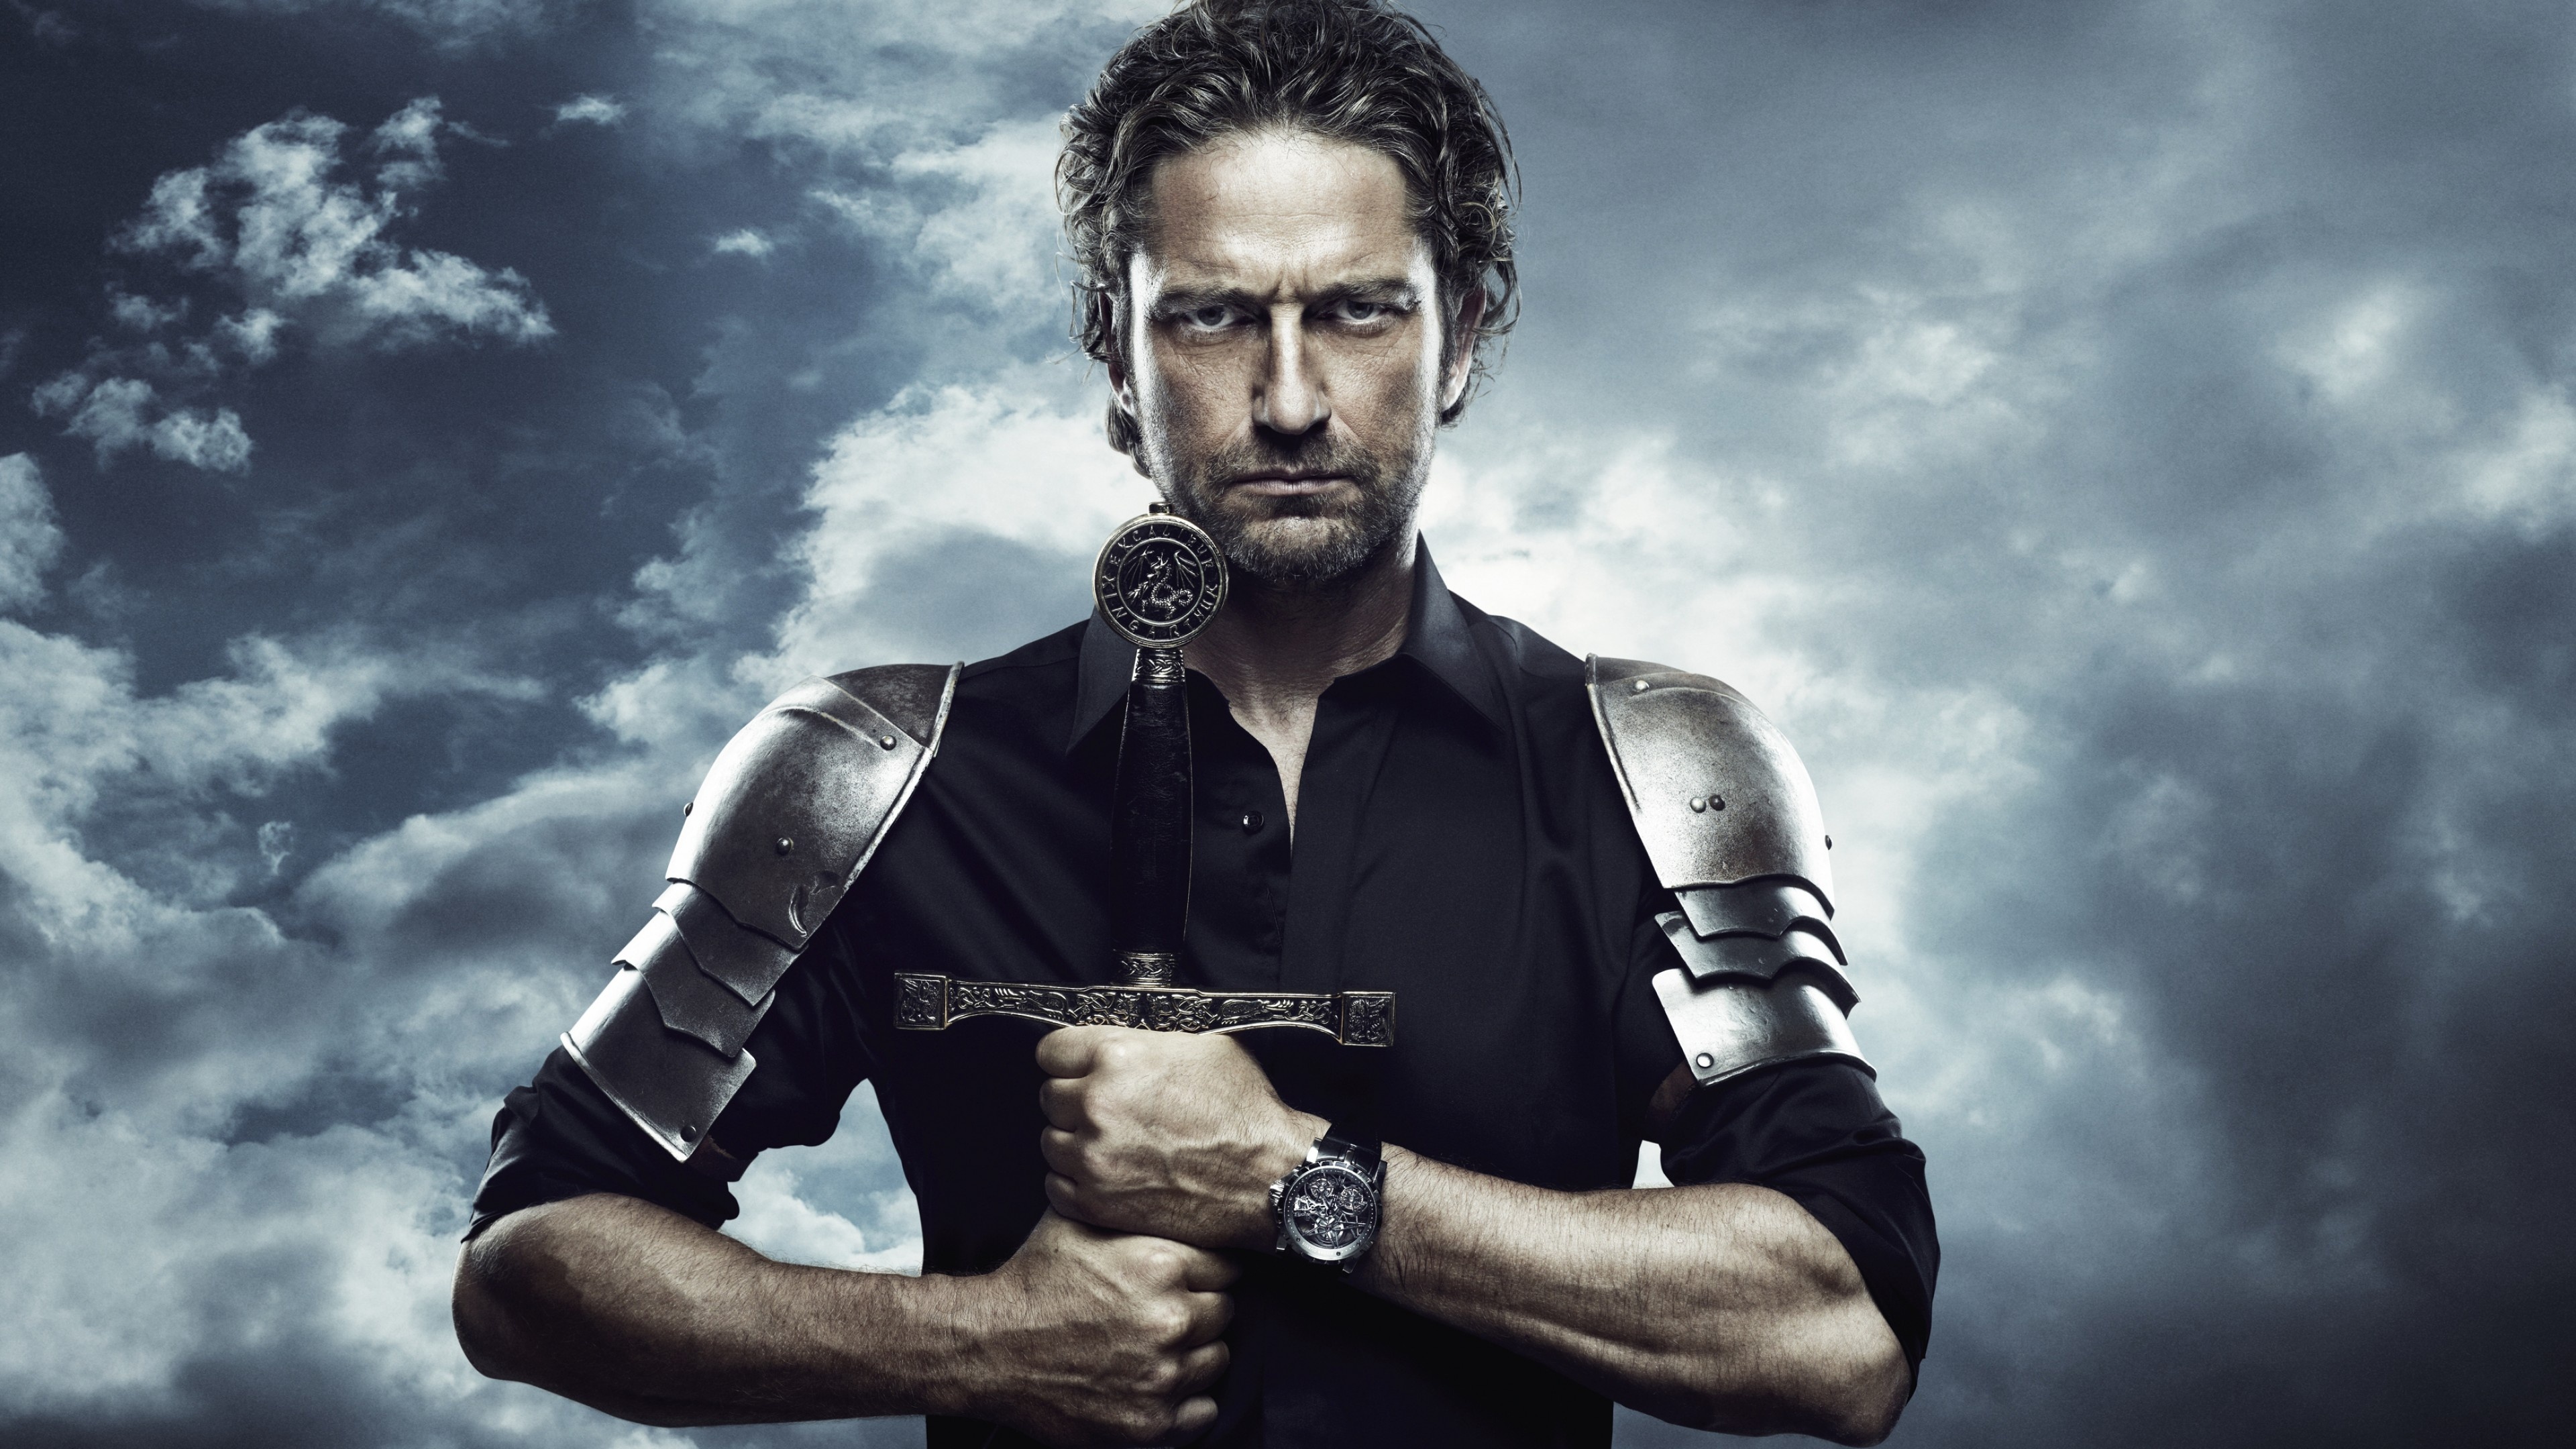 Gerard Butler: Actor, Celebrity, One of the big screen’s leading personalities. 3840x2160 4K Background.